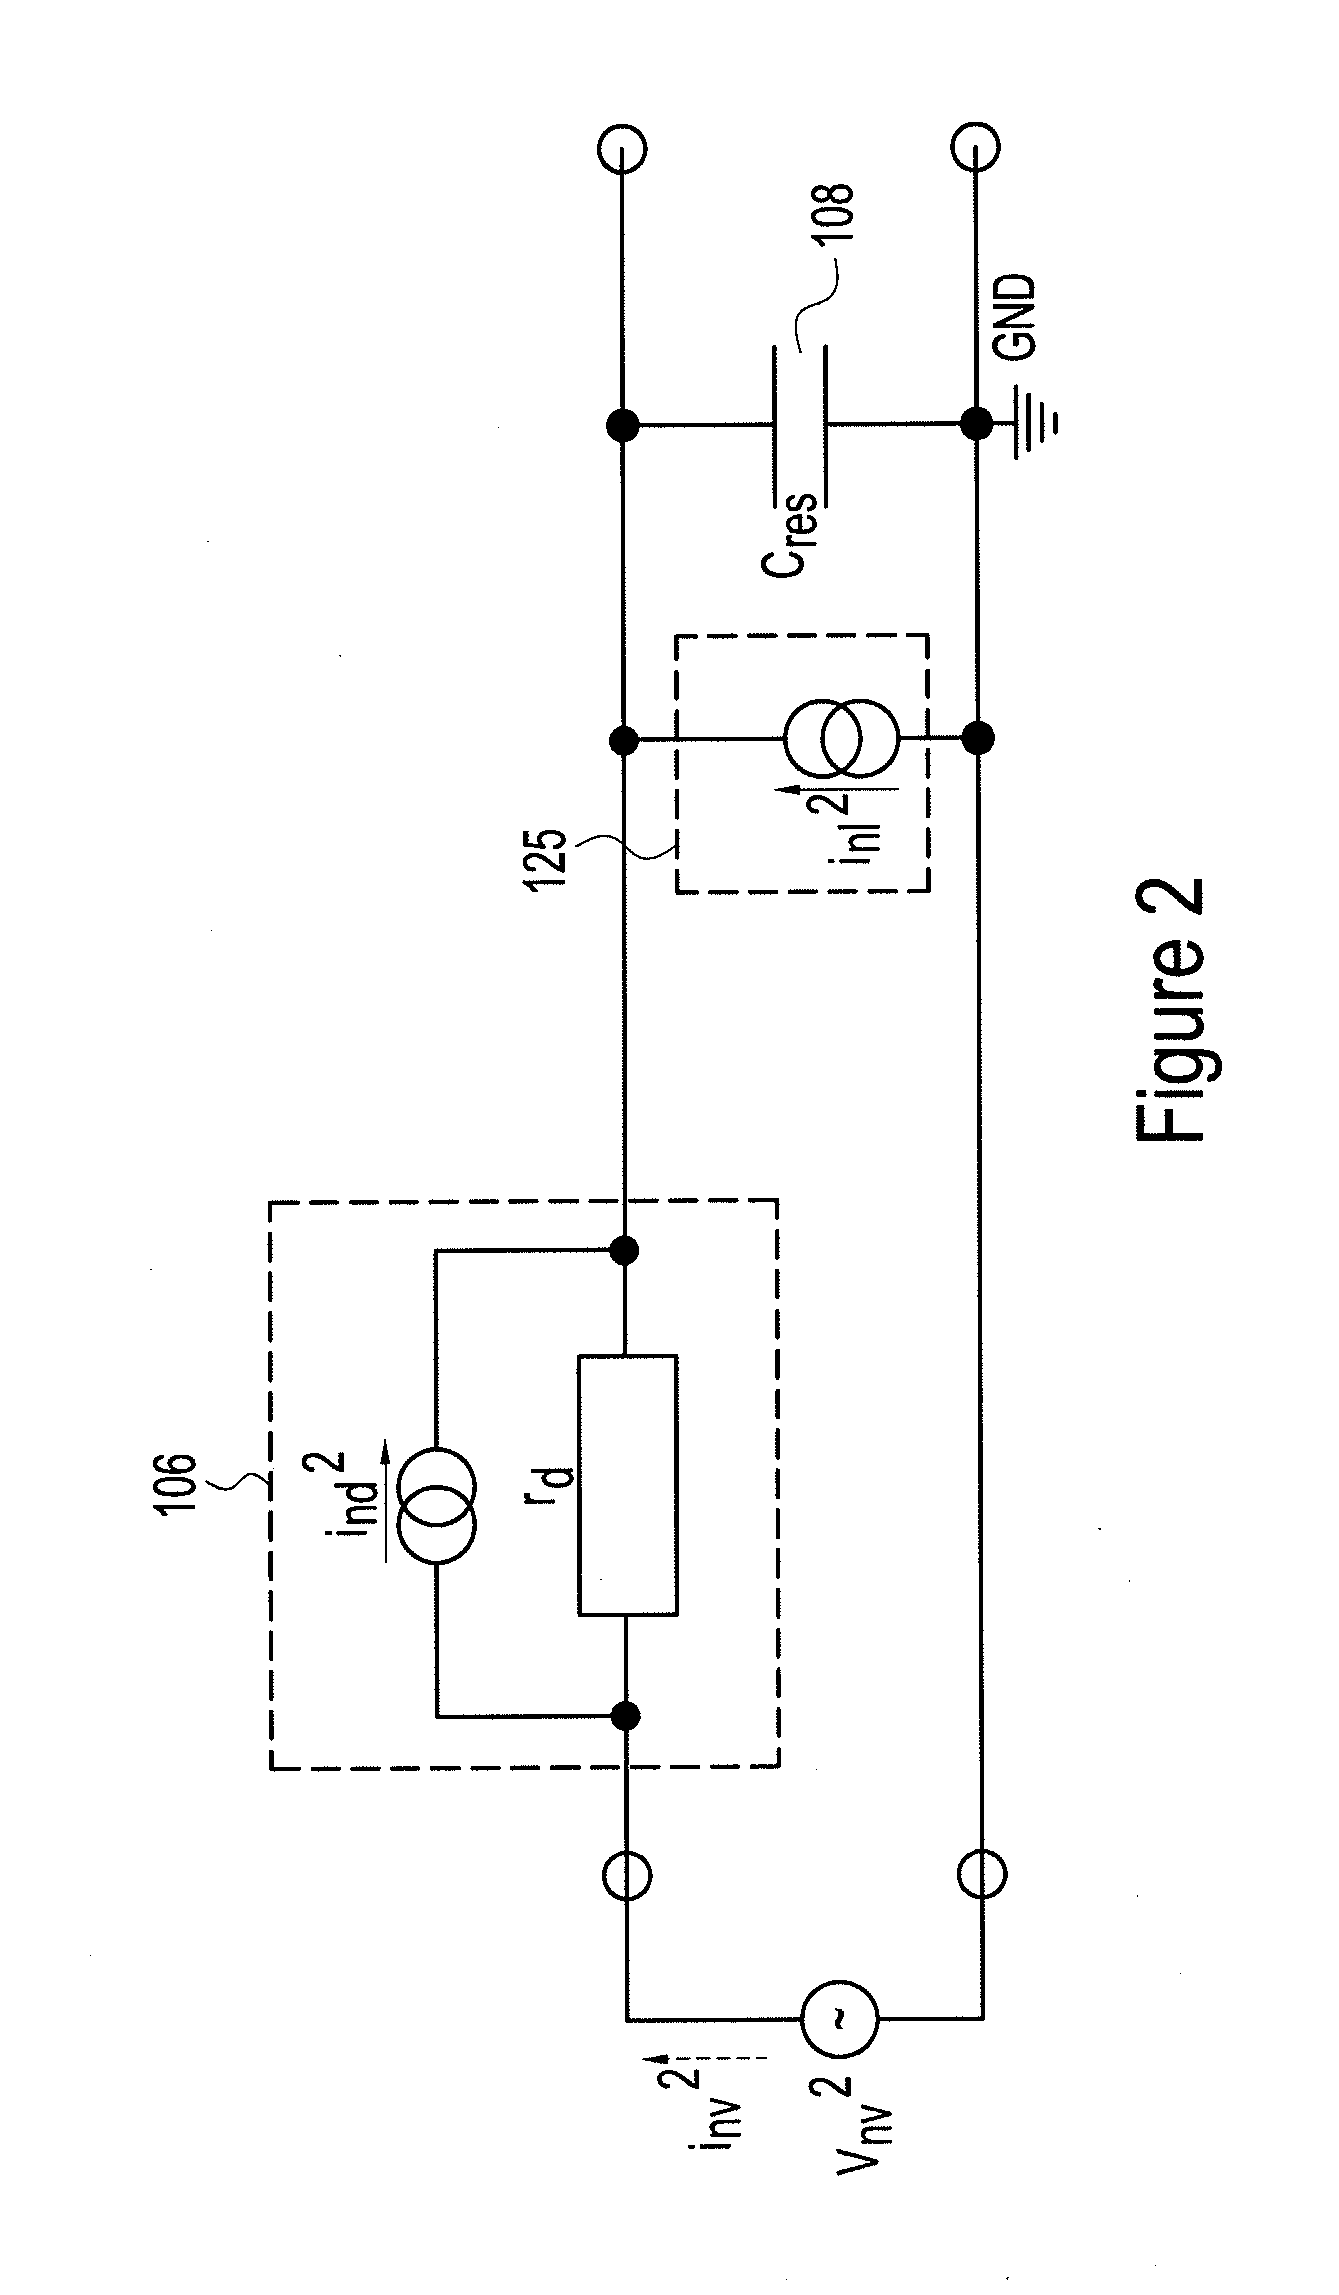 Circuits for biasing/charging high impedance loads